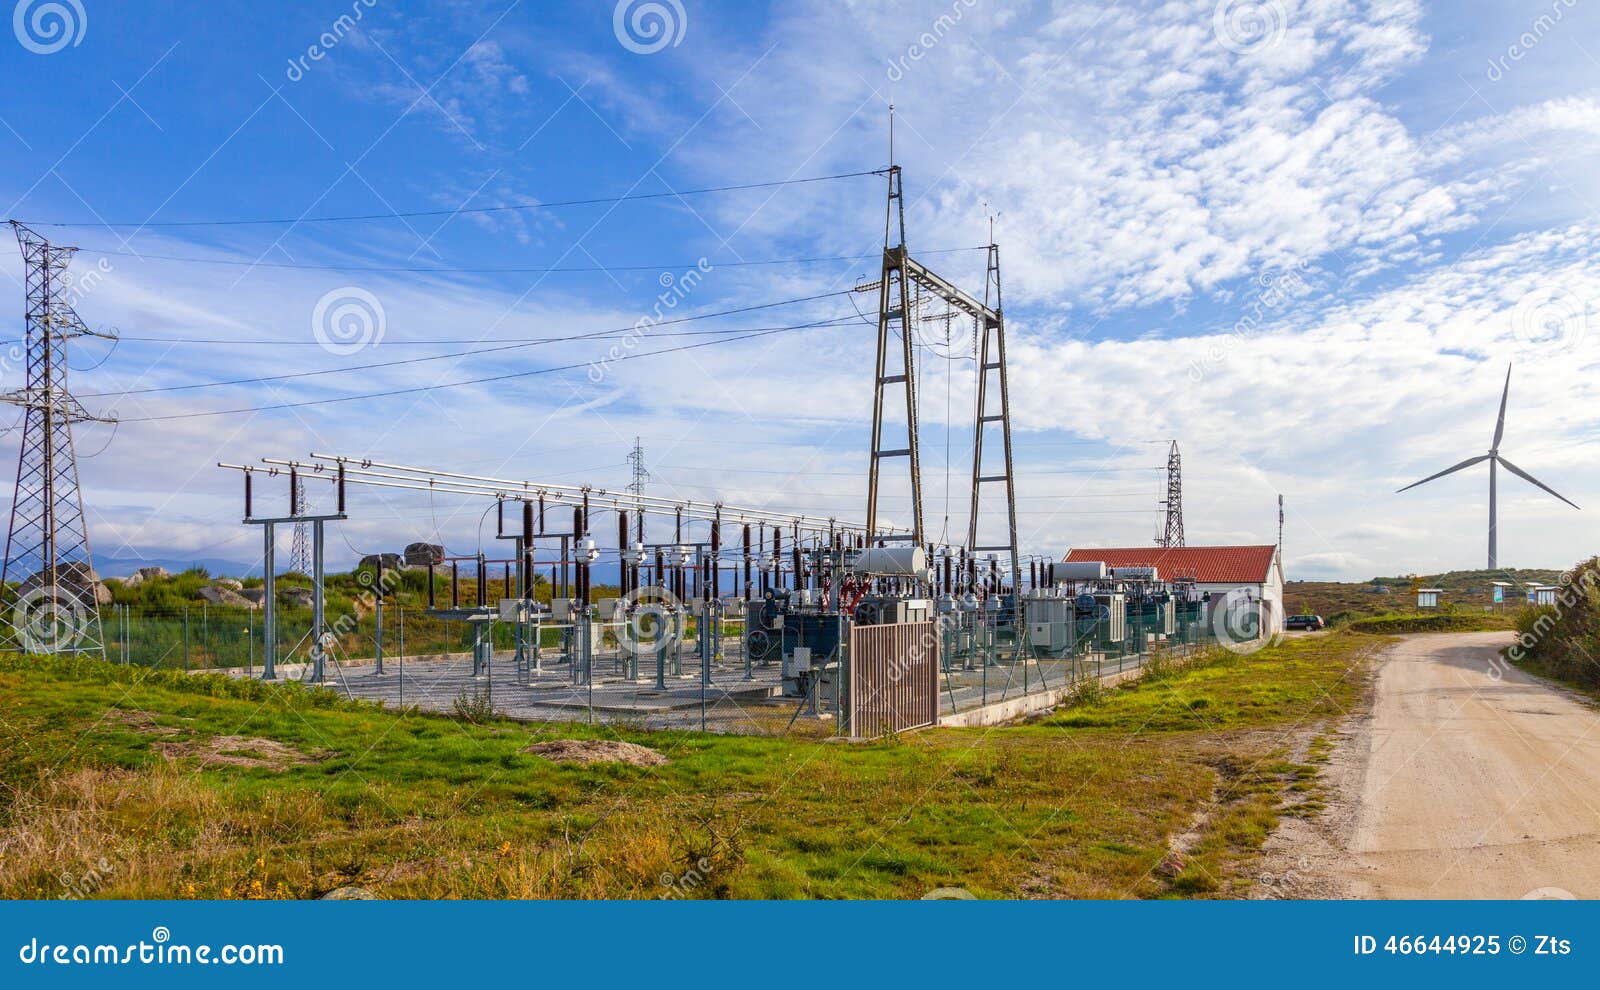 collector substation for a wind farm